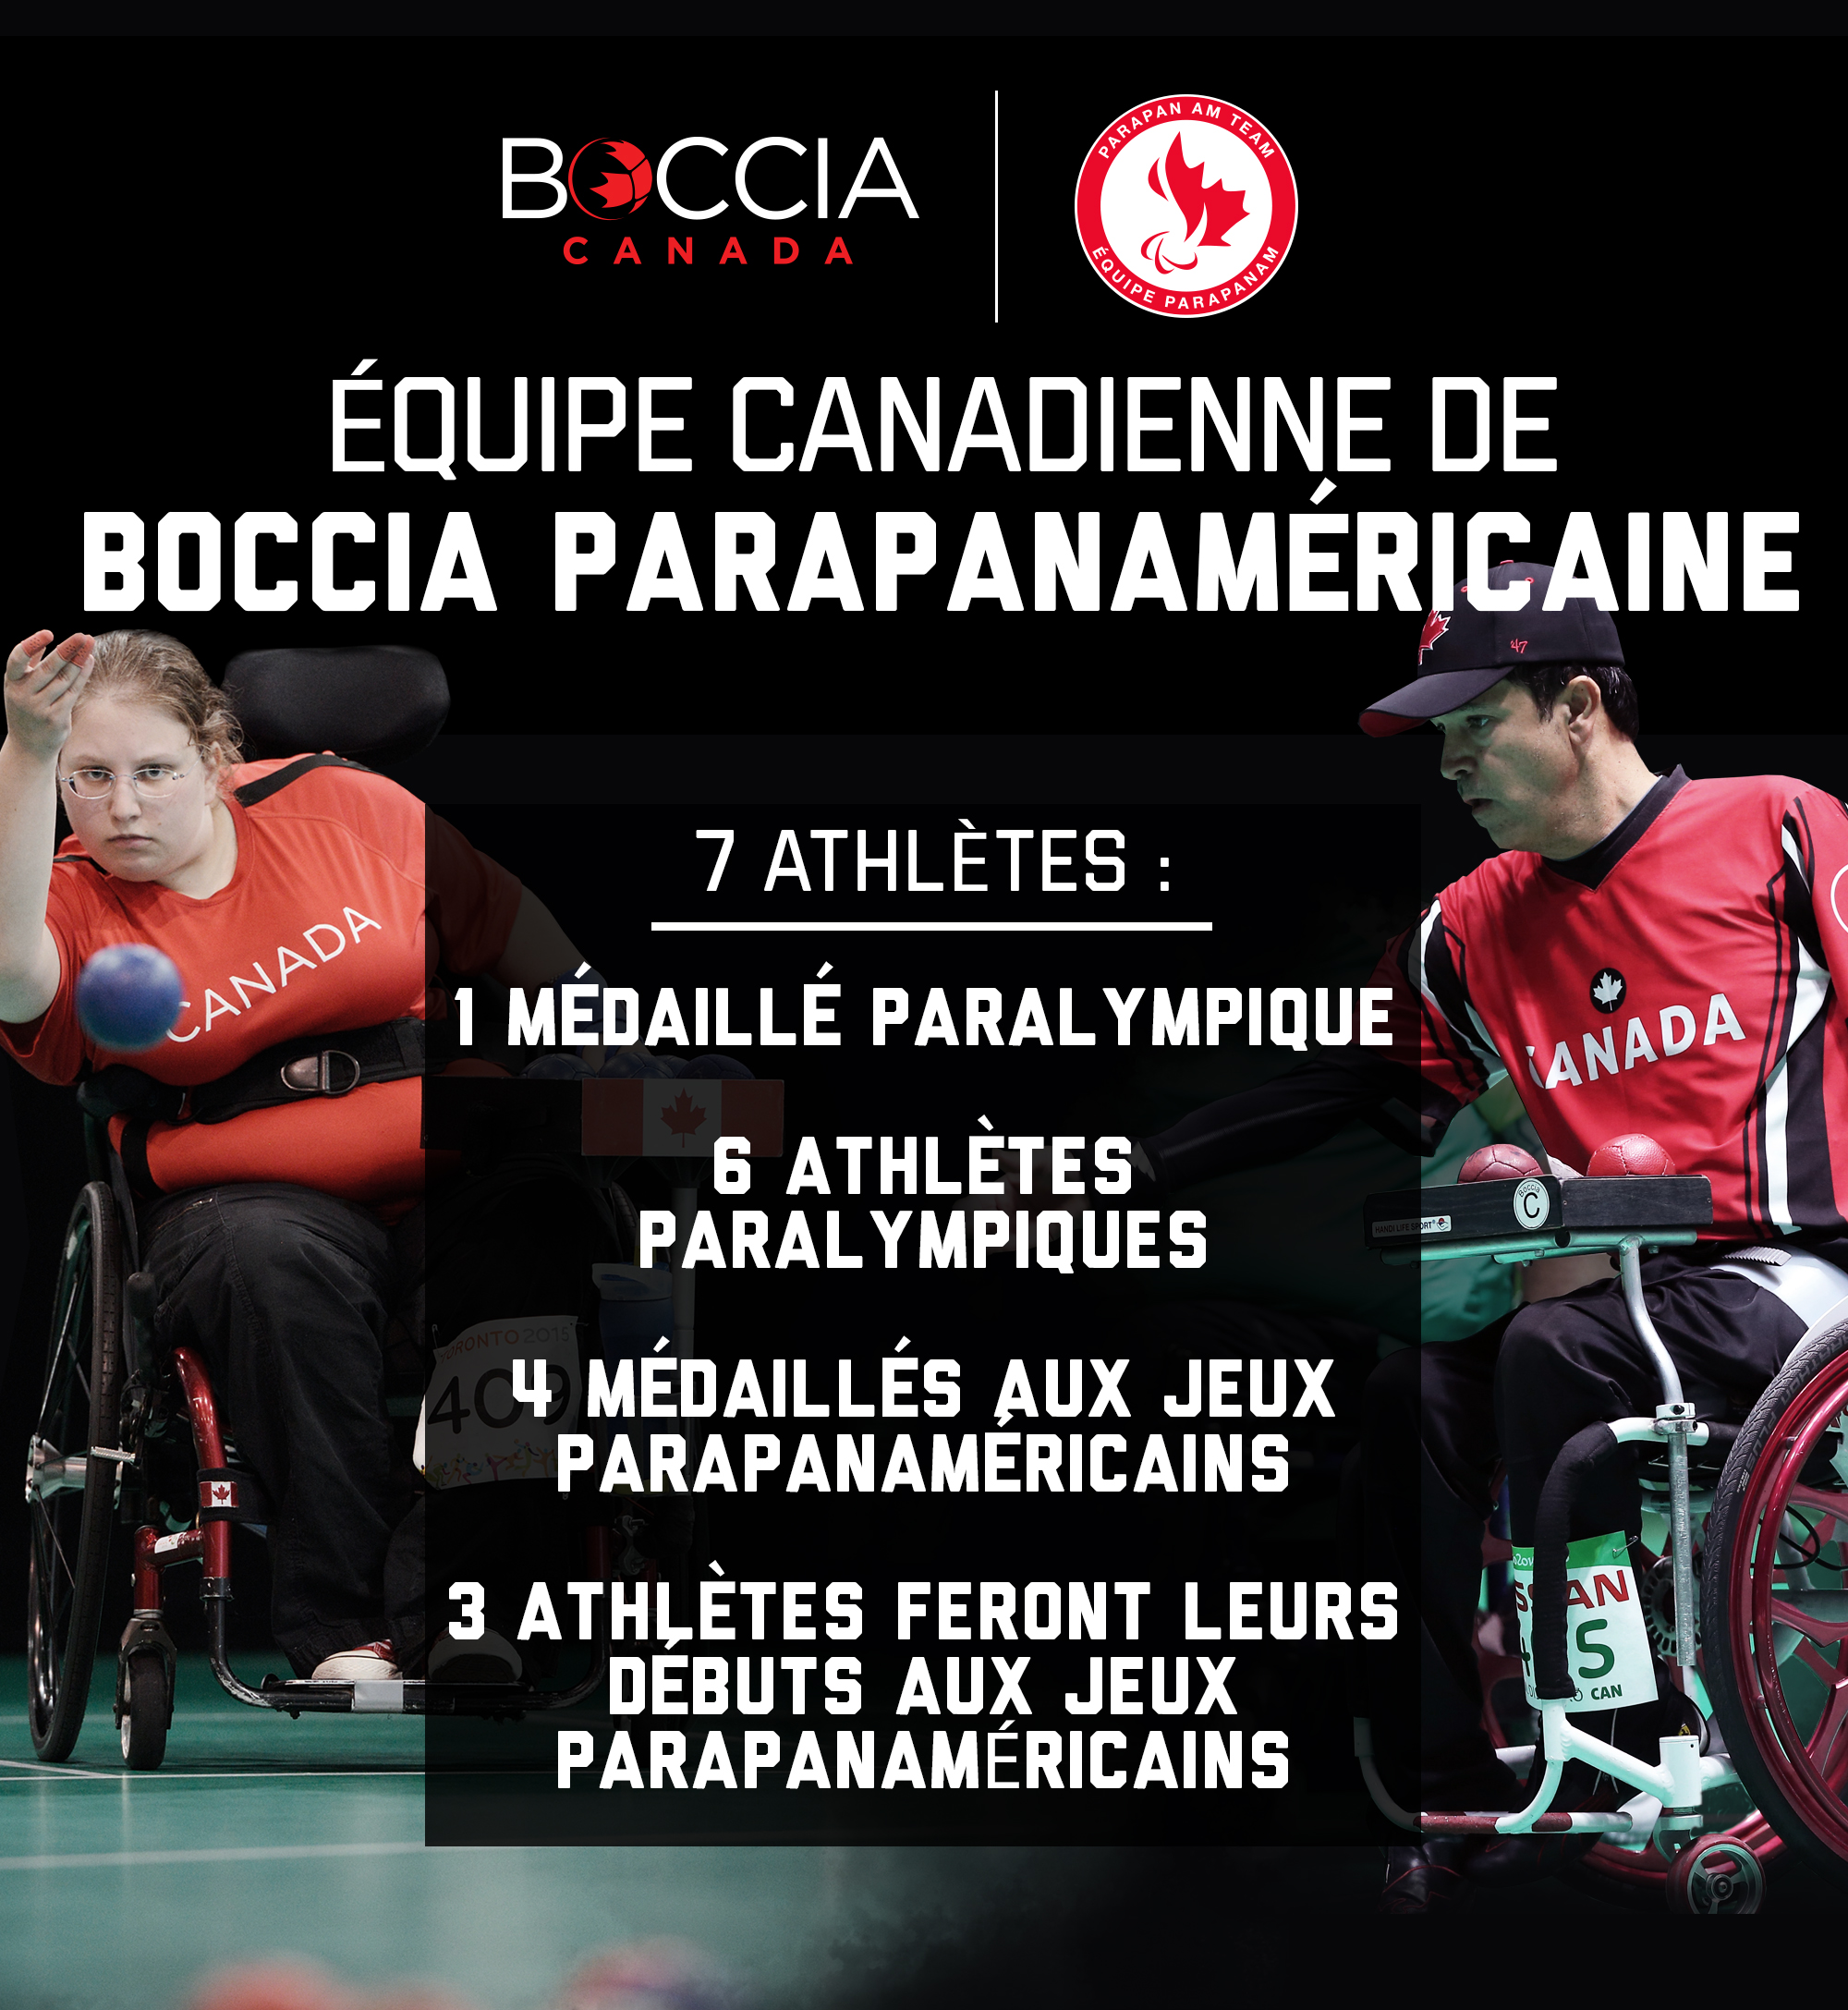 A graphic showing the make-up of the Canadian Parapan Am Boccia Team